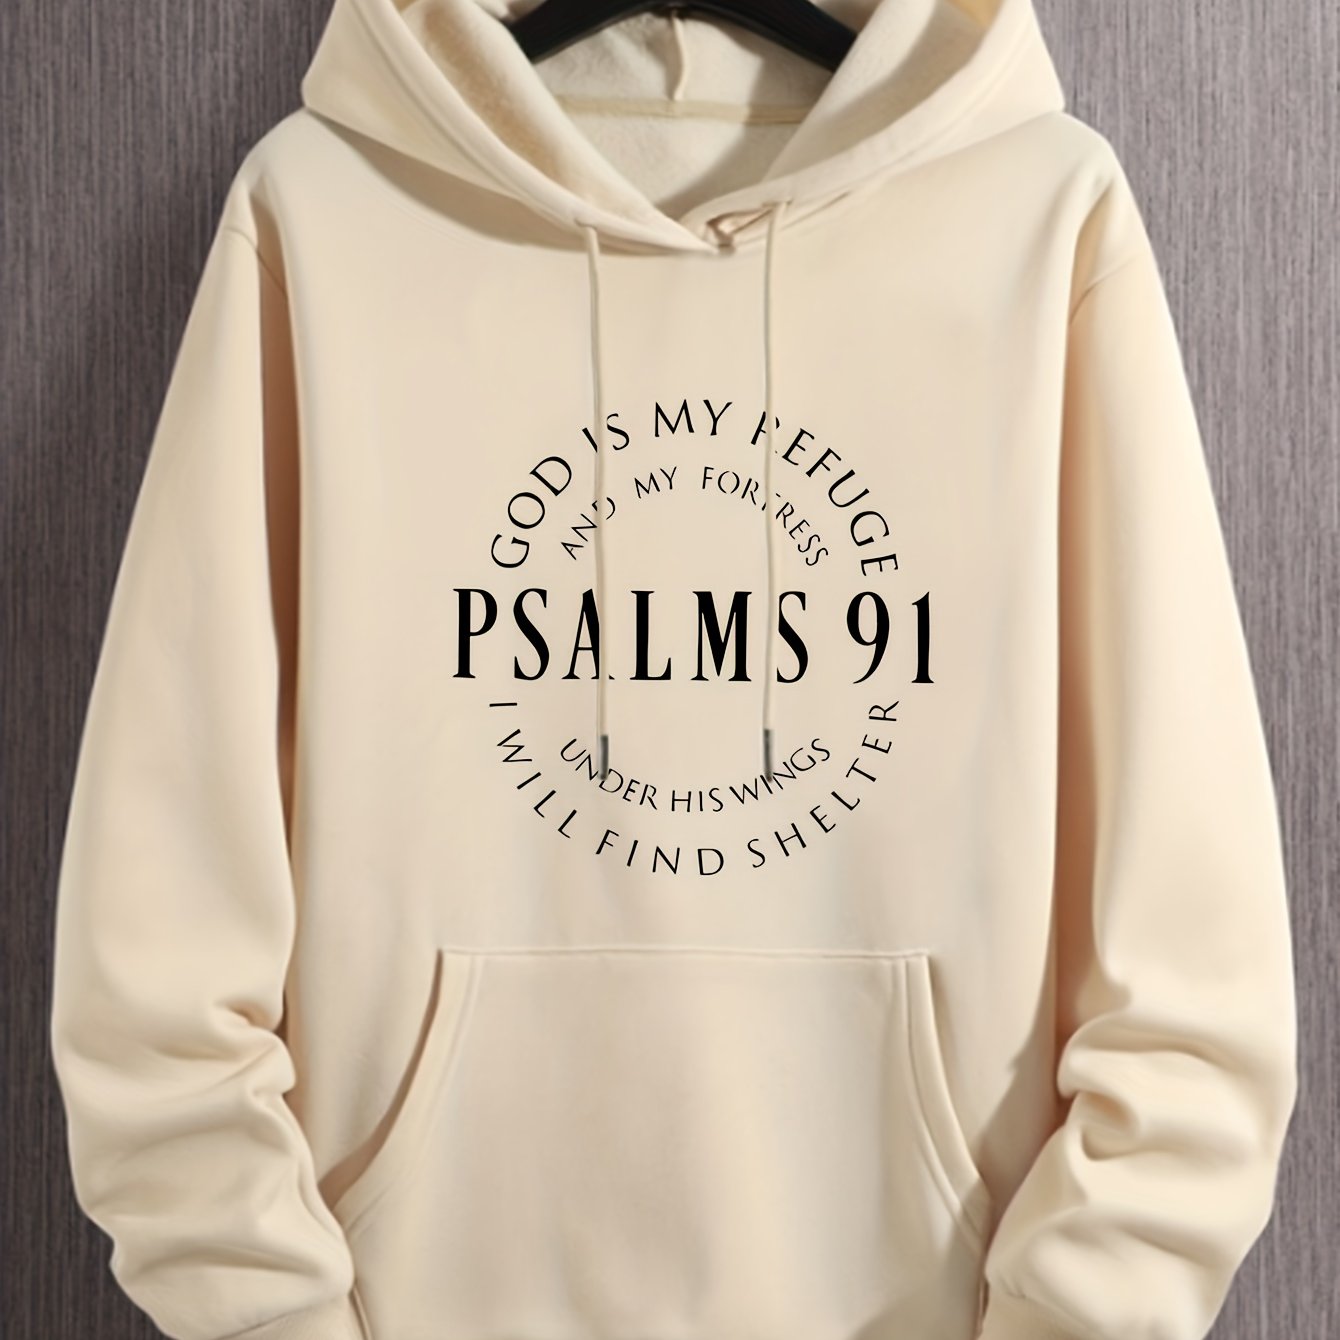 PSALMS 91 Print Hoodies For Men, Graphic Hoodie With Kangaroo Pocket, Comfy Loose Drawstring Trendy Hooded Pullover, Mens Clothing For Autumn Winter